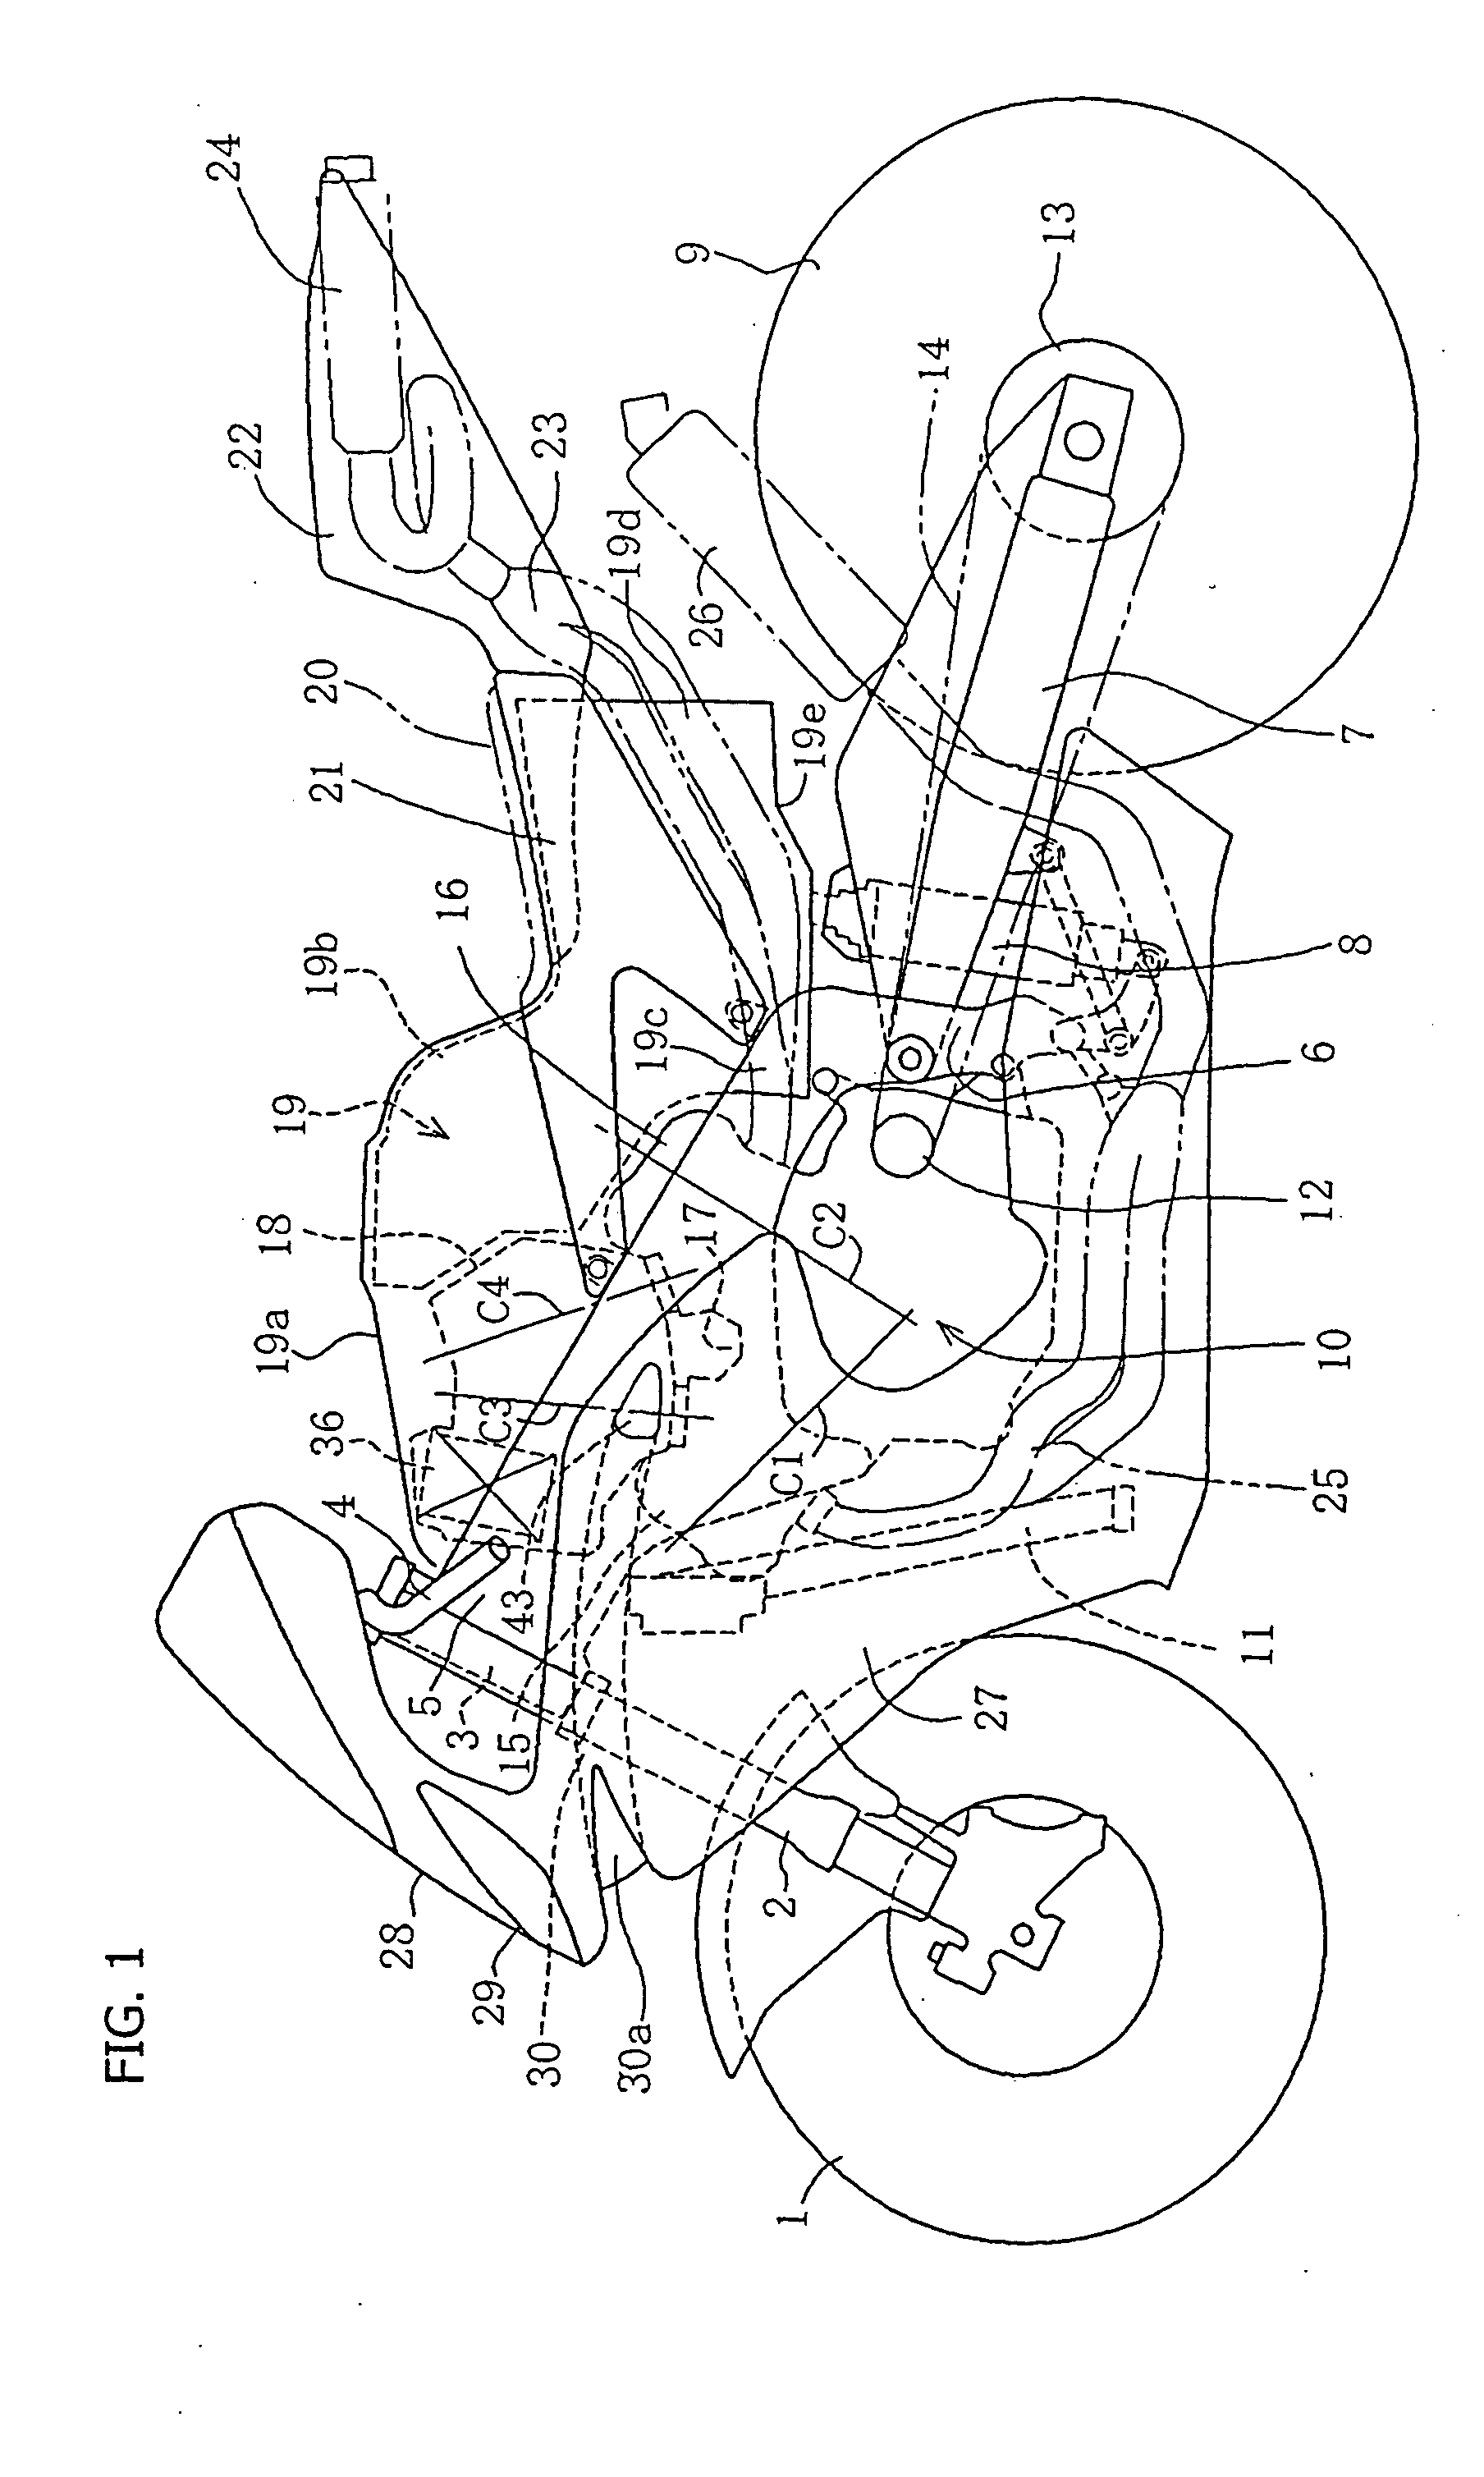 Intake air management apparatus for a vehicle, and motorcycle including same